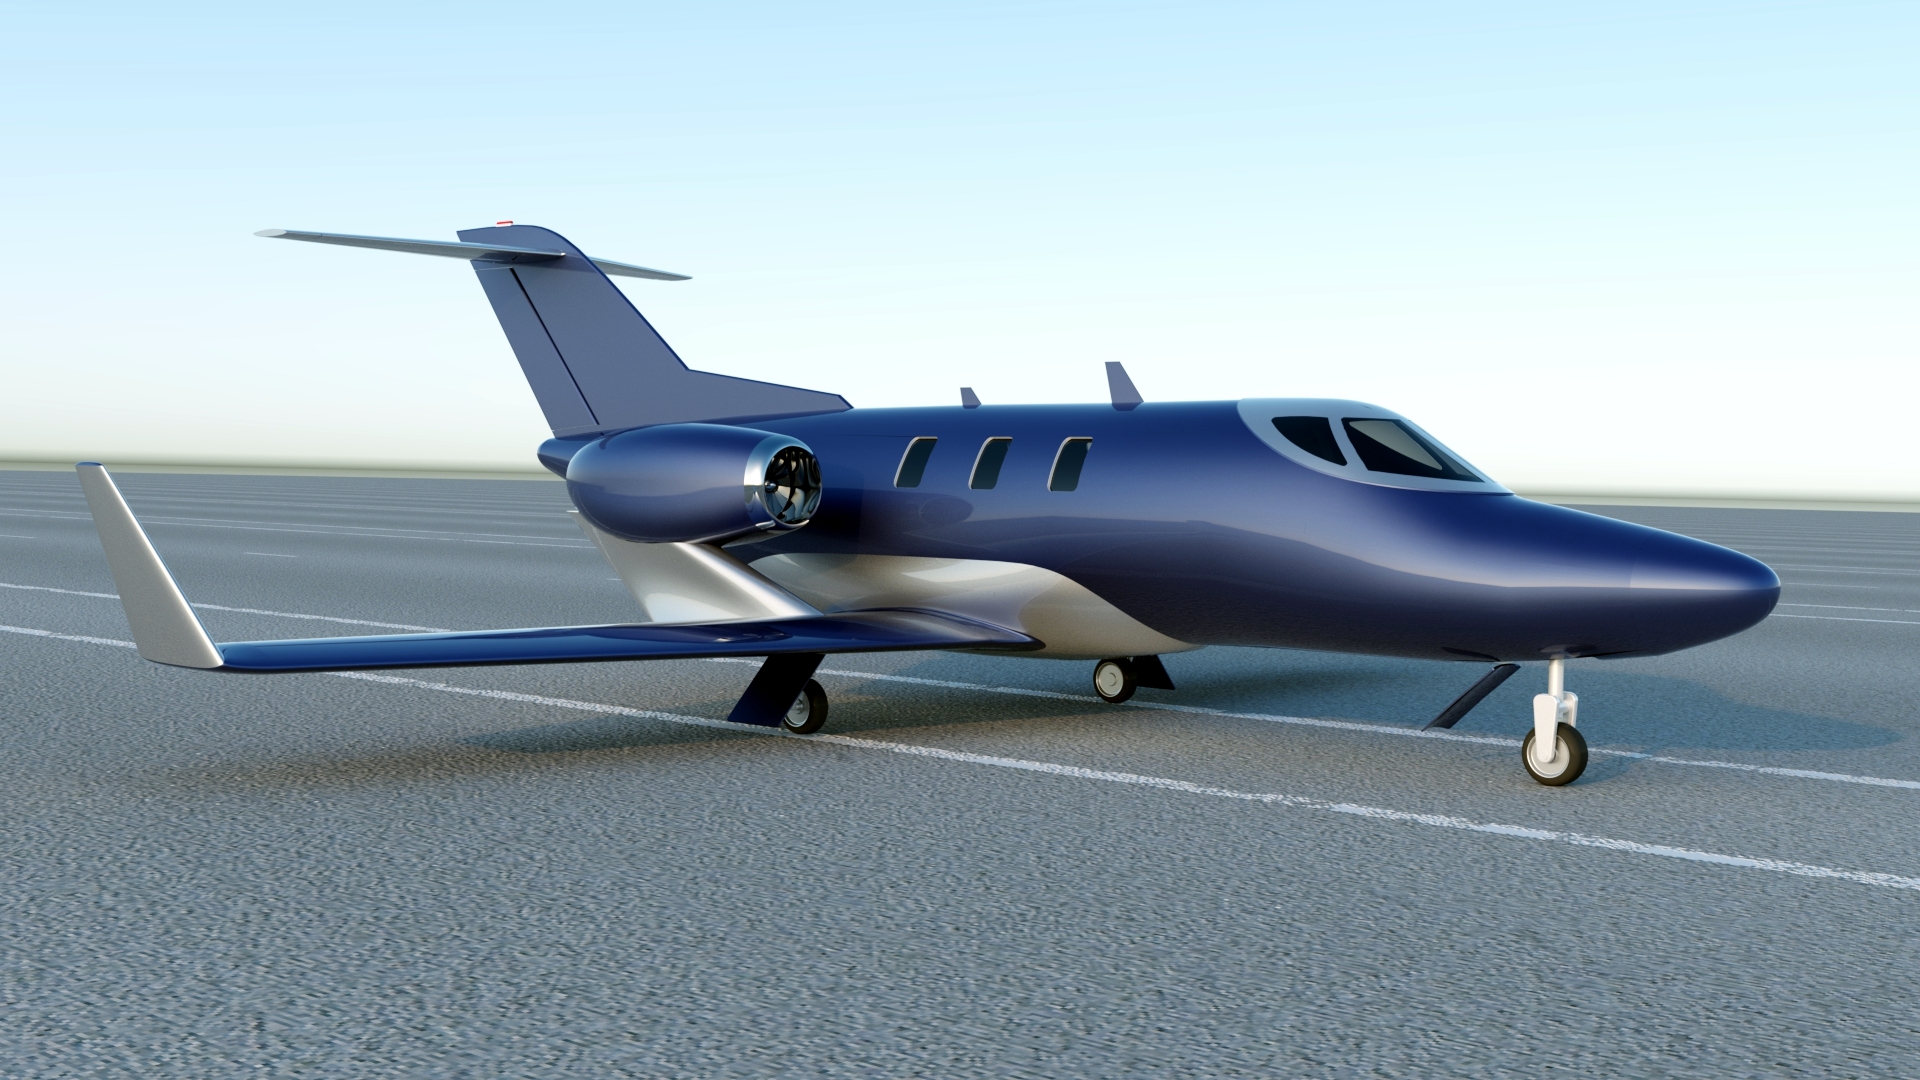 MoI Gallery - Honda jet private aircraft